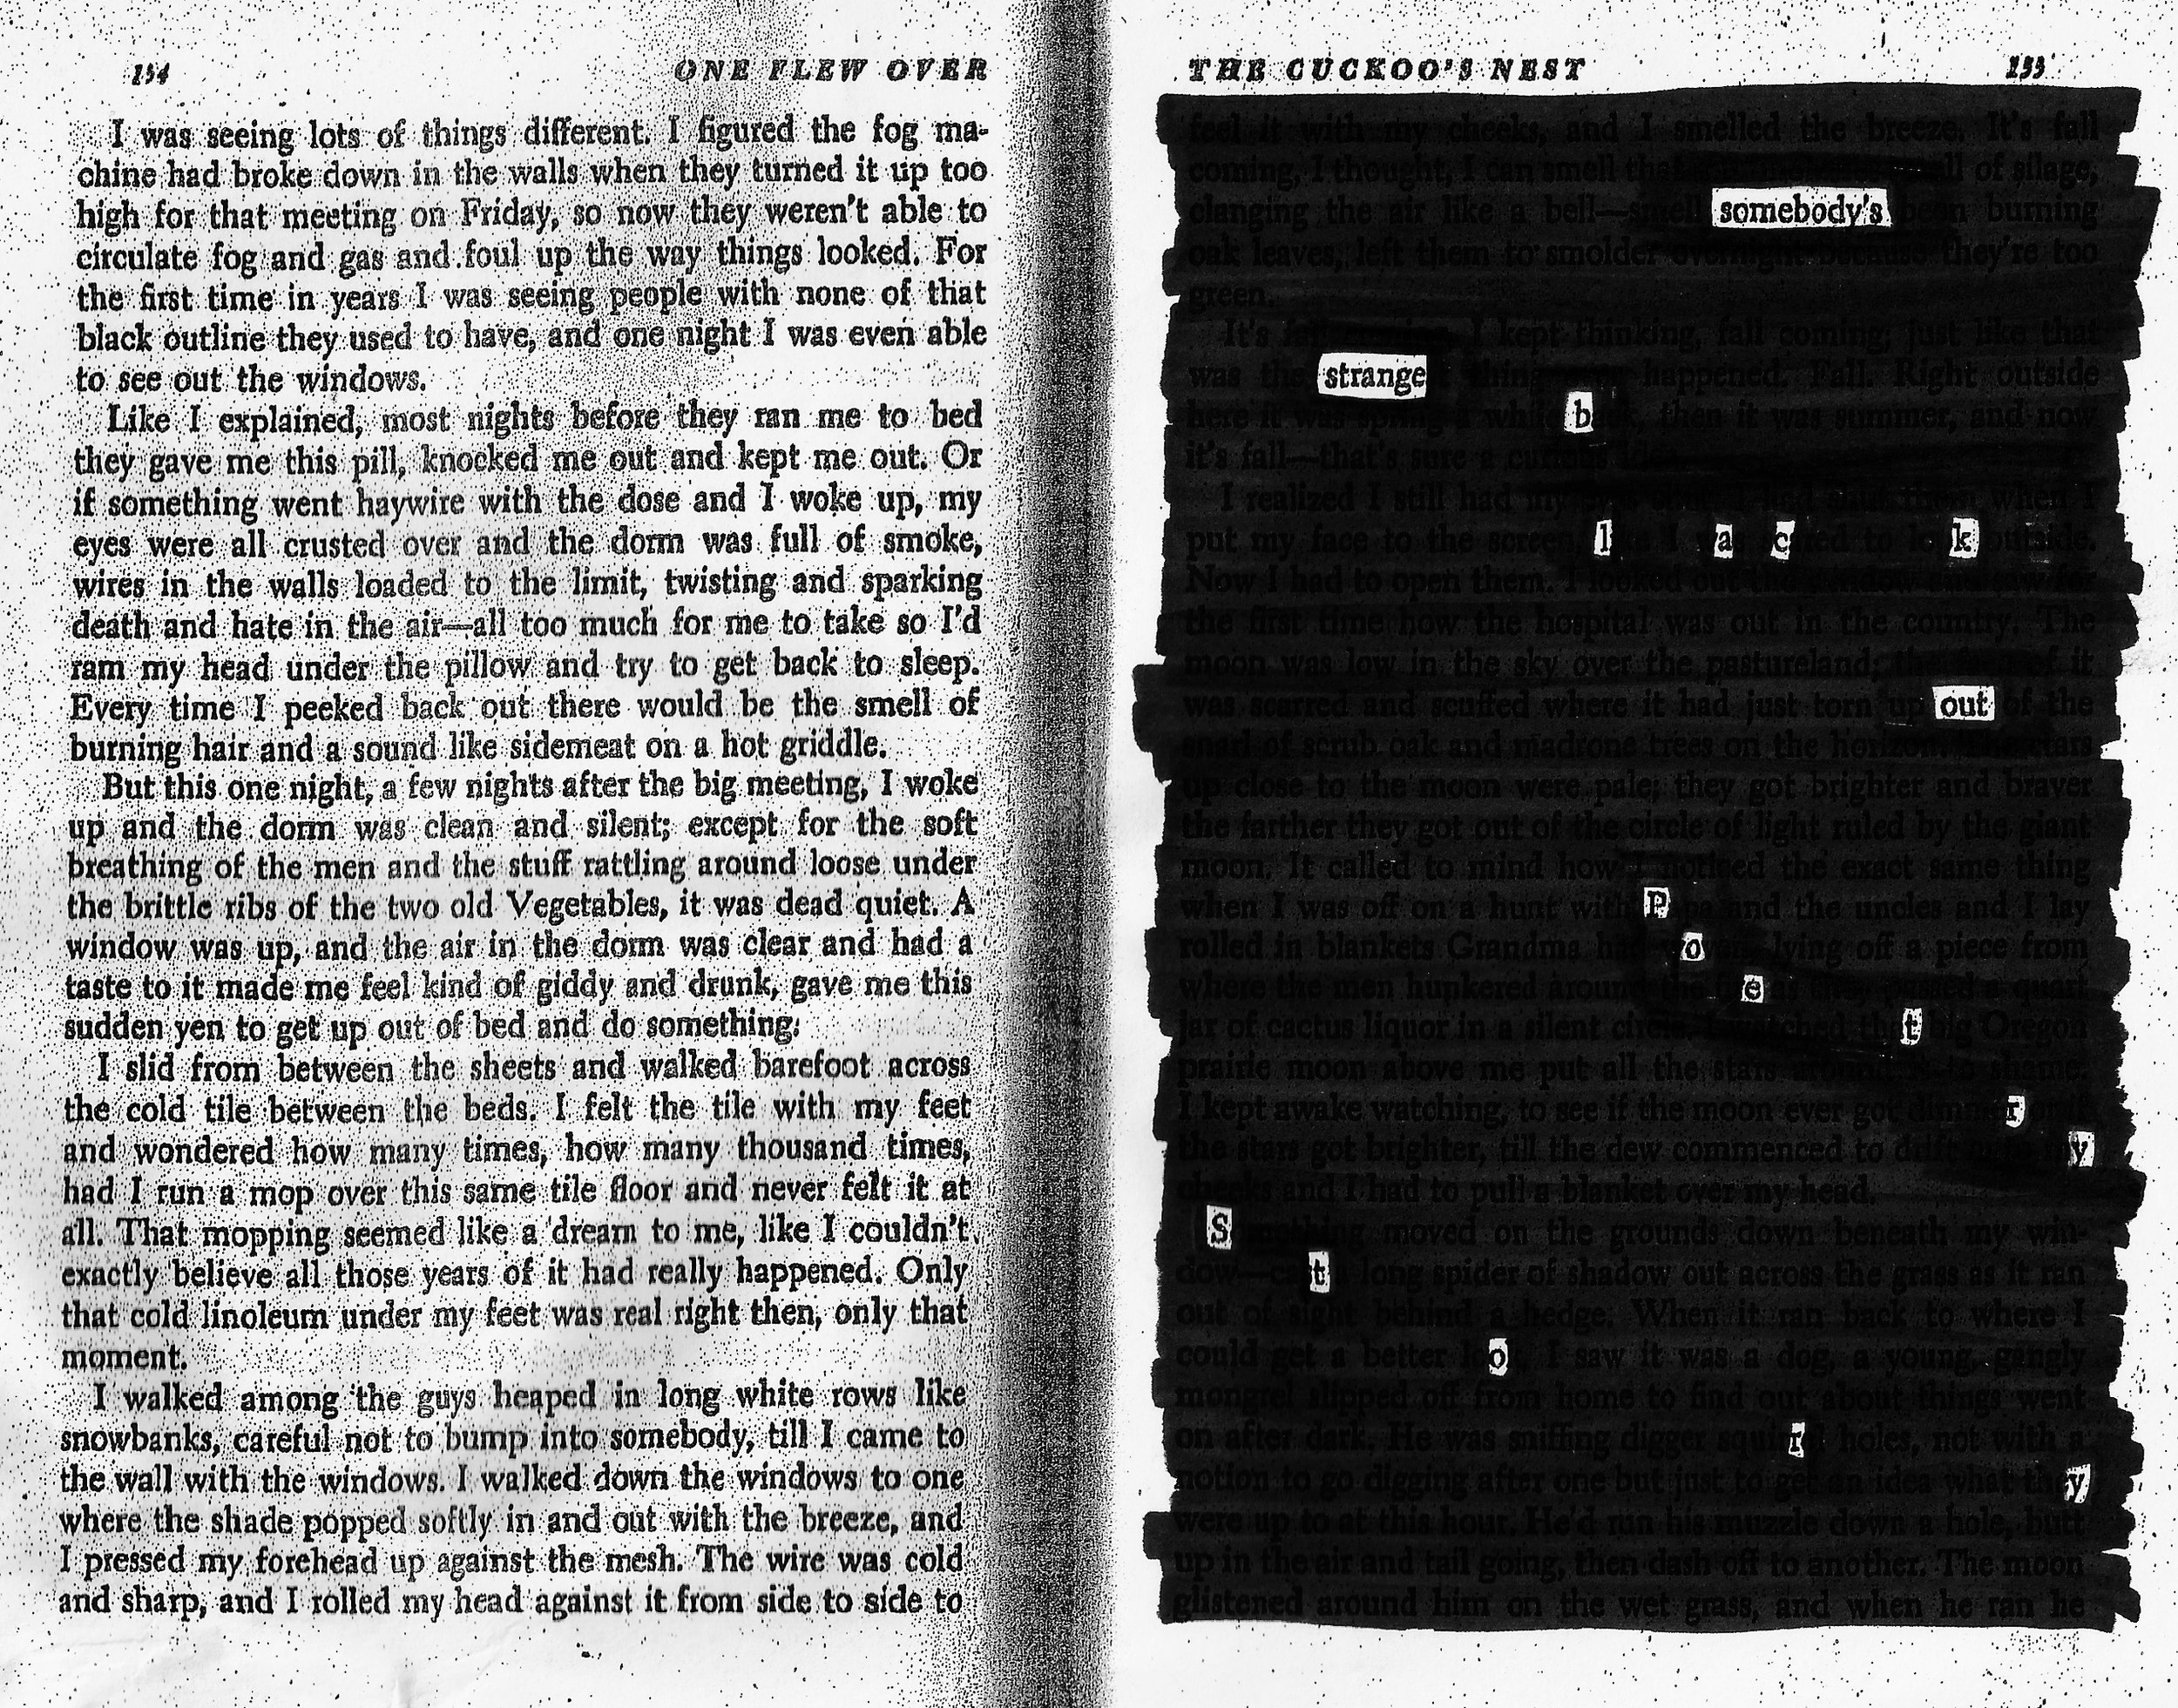  I distributed a spread from Ken Kesey's  One Flew Over the Cuckoo's Nest  to several people I met on the streets of New York and asked them to make blackout poems for me. I took two pictures of each person. The story is a collaborative effort betwee